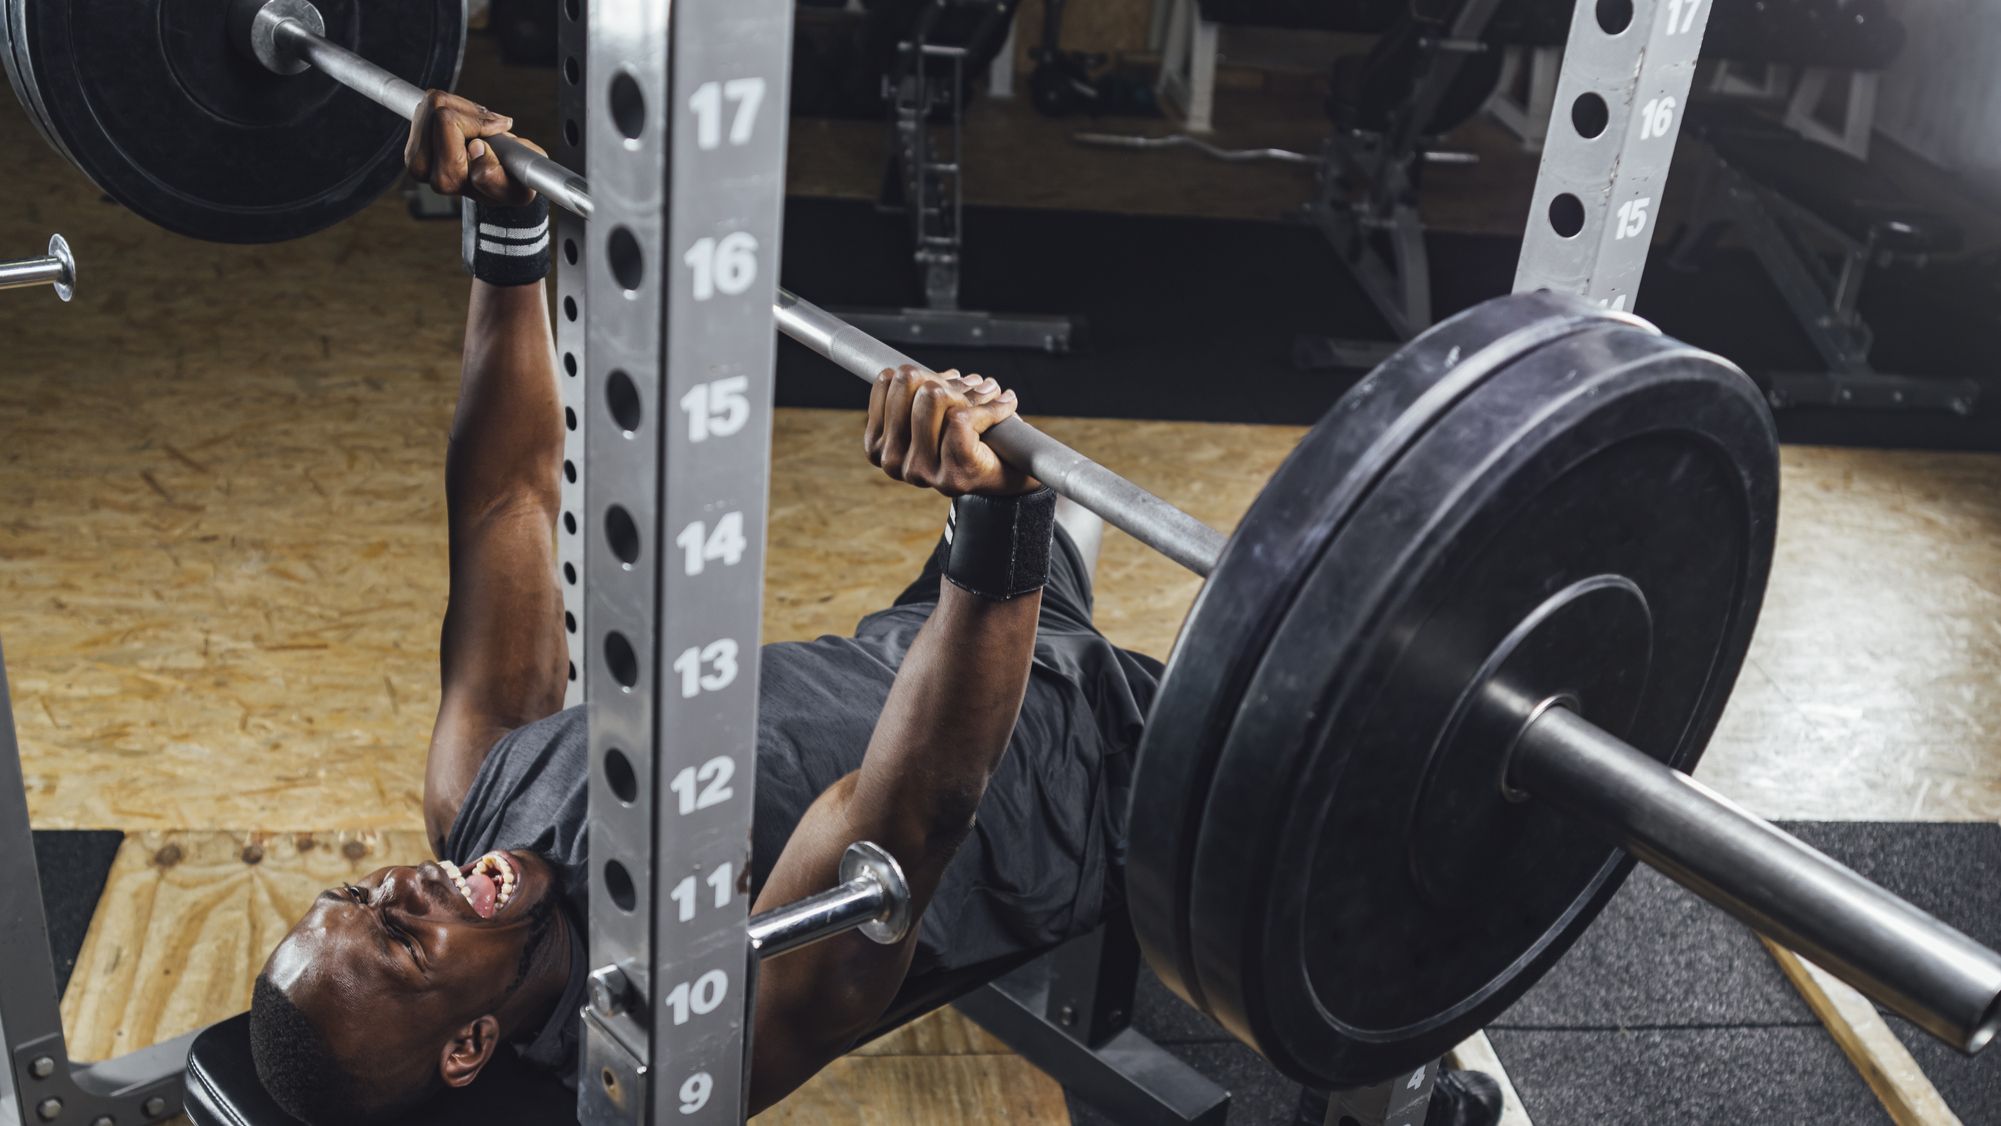 Smith machine incline bench press exercise instructions and video